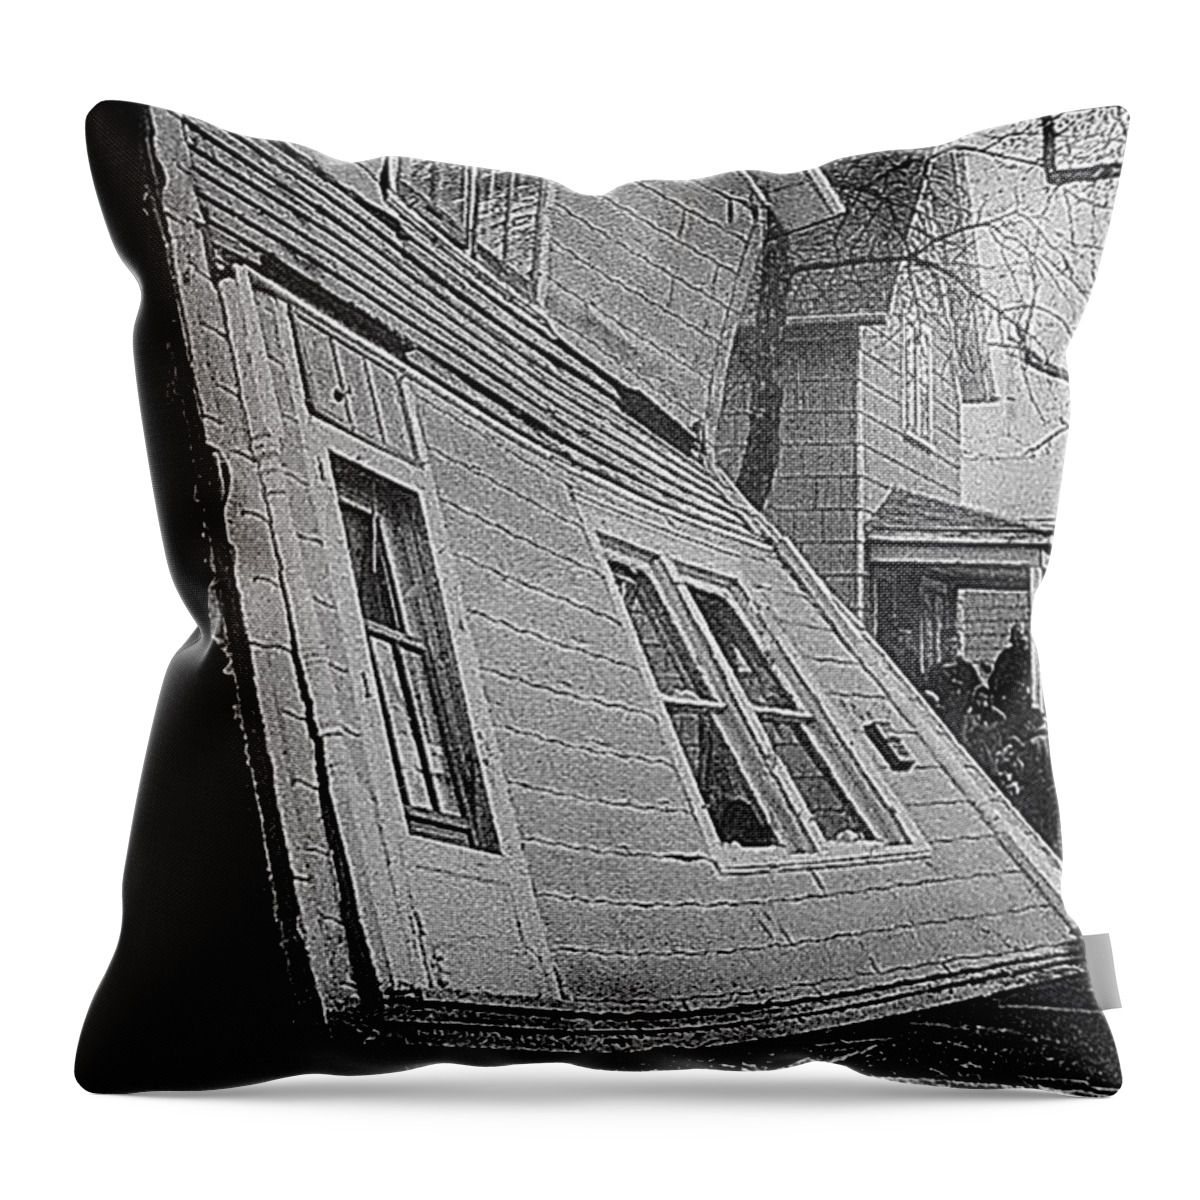 Gas Explosion Onlookers Aberdeen South Dakota 1966 Black And White Throw Pillow featuring the photograph Gas explosion onlookers Aberdeen South Dakota 1966 black and white by David Lee Guss